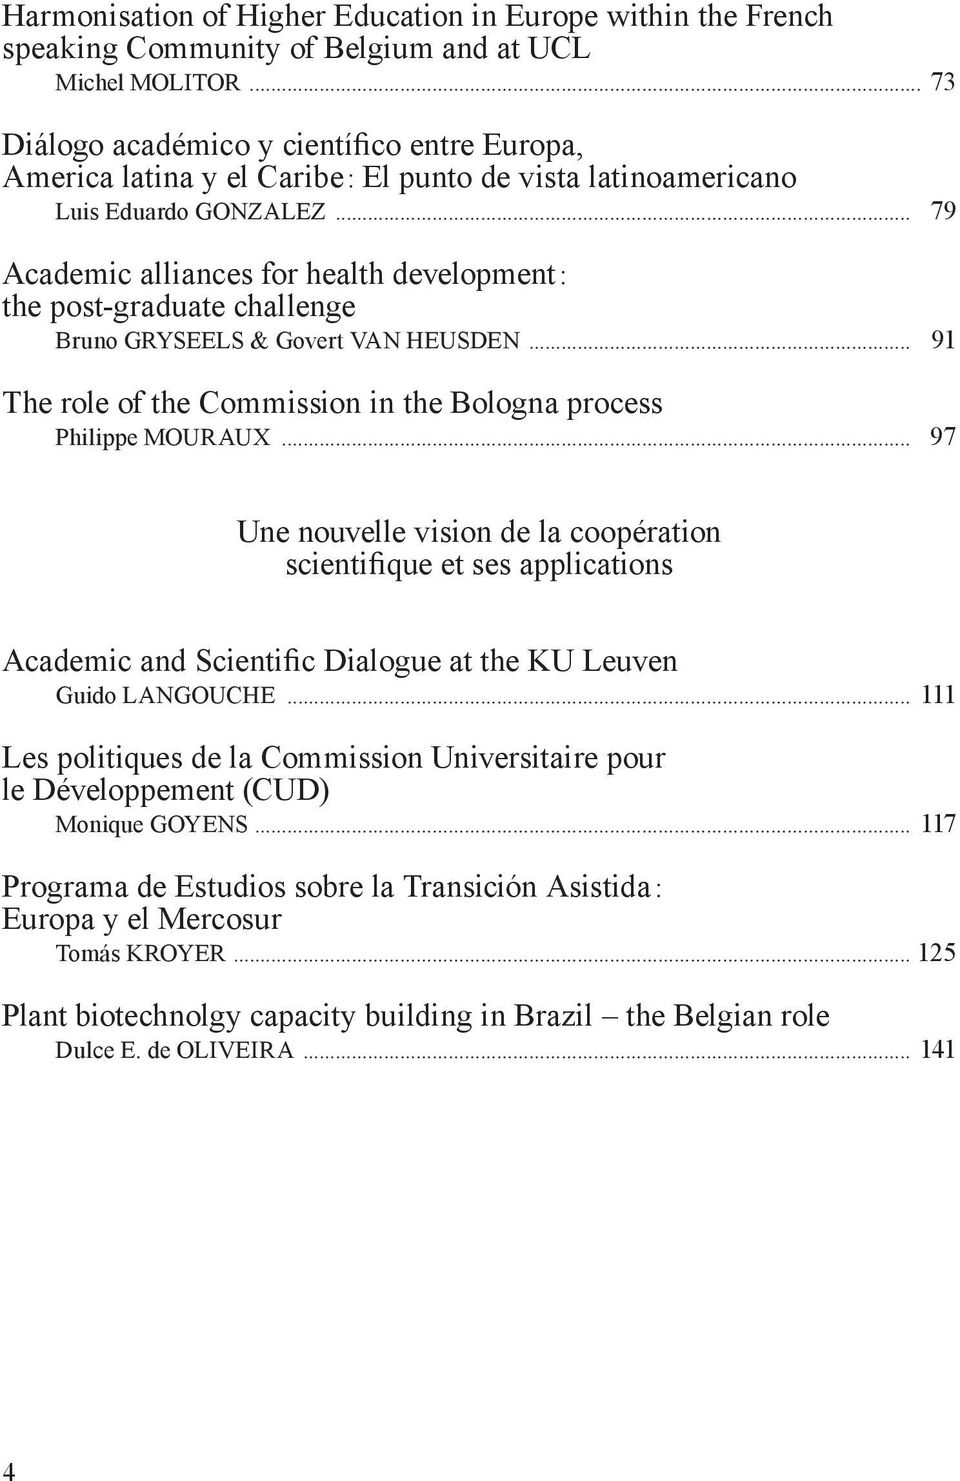 .. 79 Academic alliances for health development : the post-graduate challenge Bruno GRYSEELS & Govert VAN HEUSDEN... 91 The role of the Commission in the Bologna process Philippe MOURAUX.